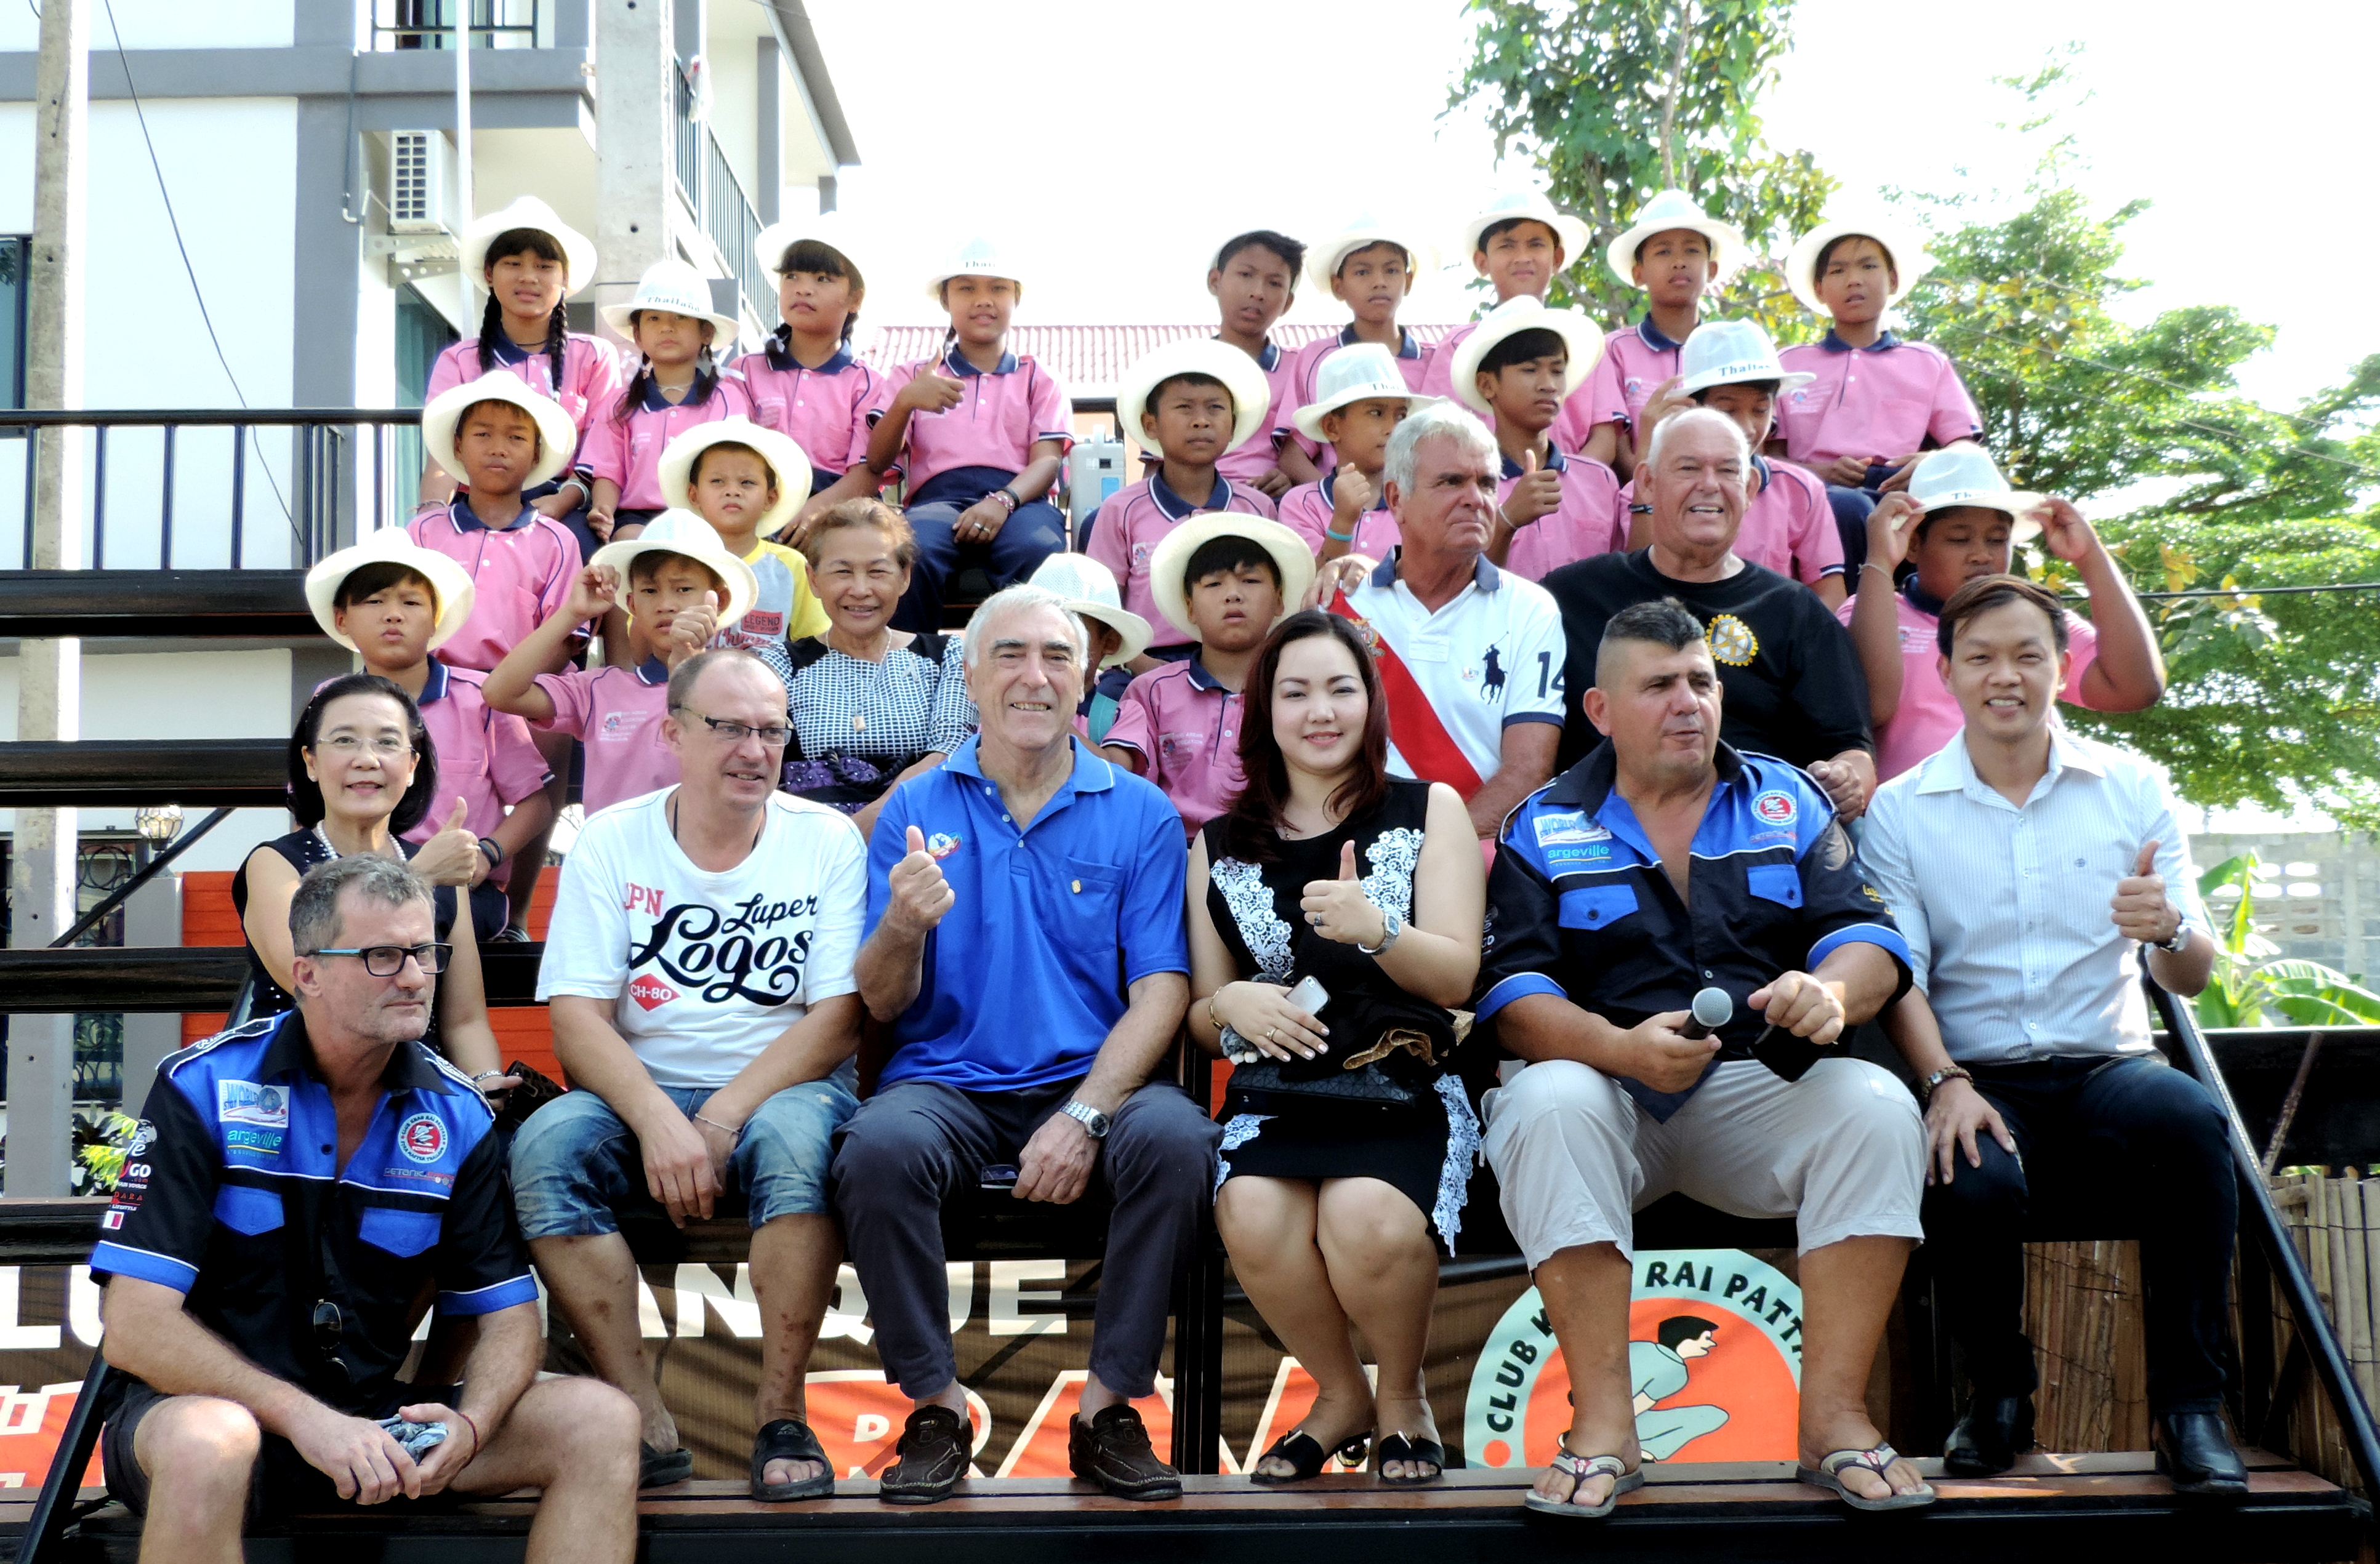 Children under the care of the Human Help Network Foundation Thailand pose with Rotary Club members at the conclusion of the petanque day.